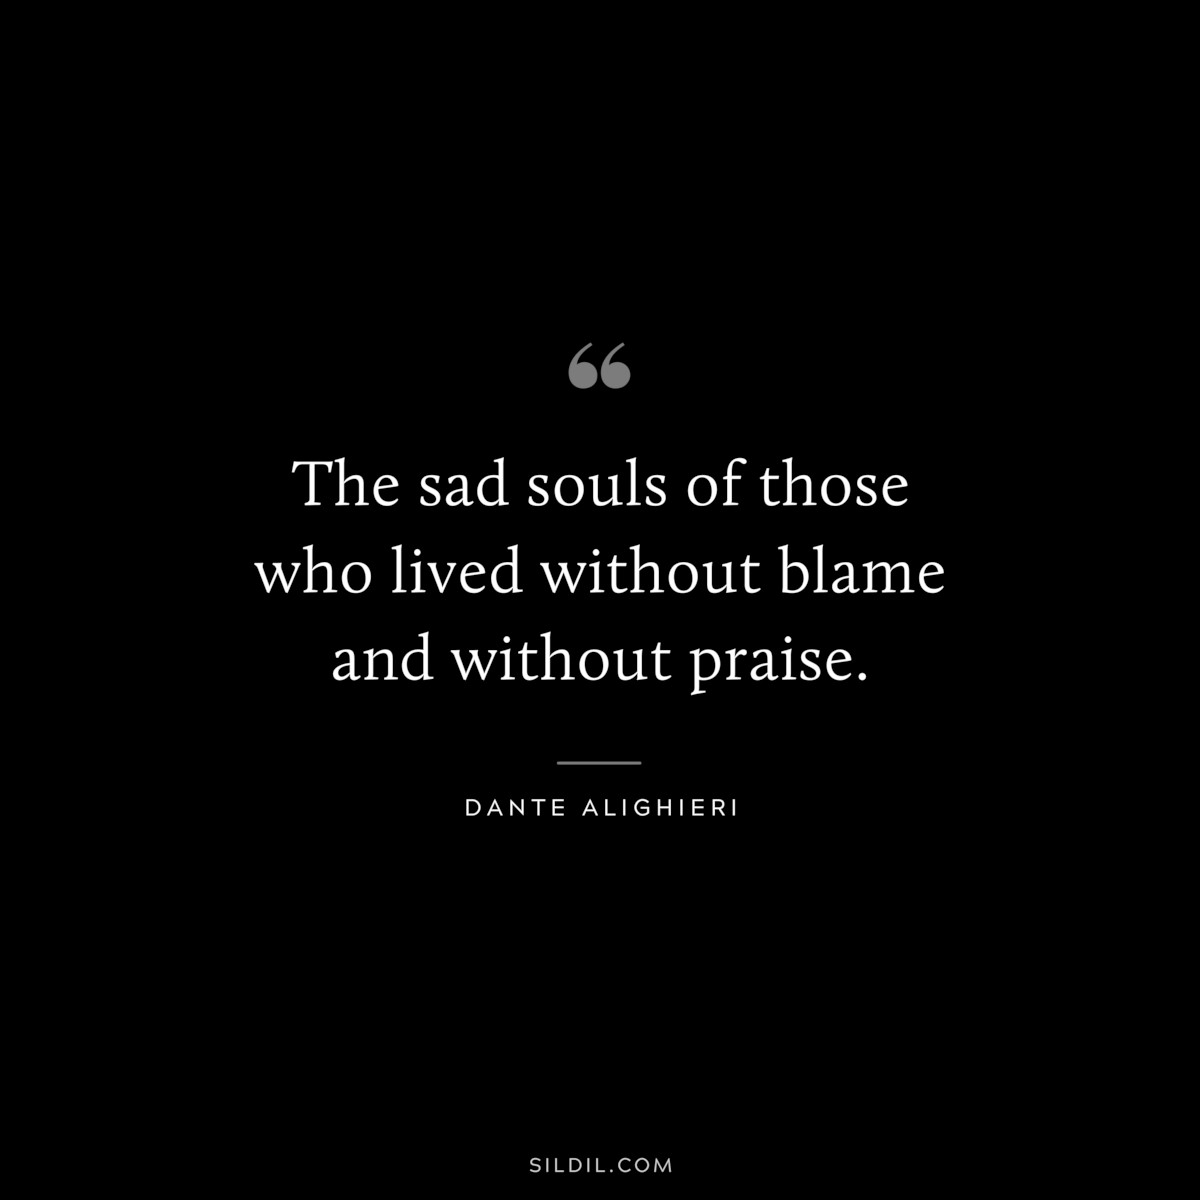 The sad souls of those who lived without blame and without praise. ― Dante Alighieri